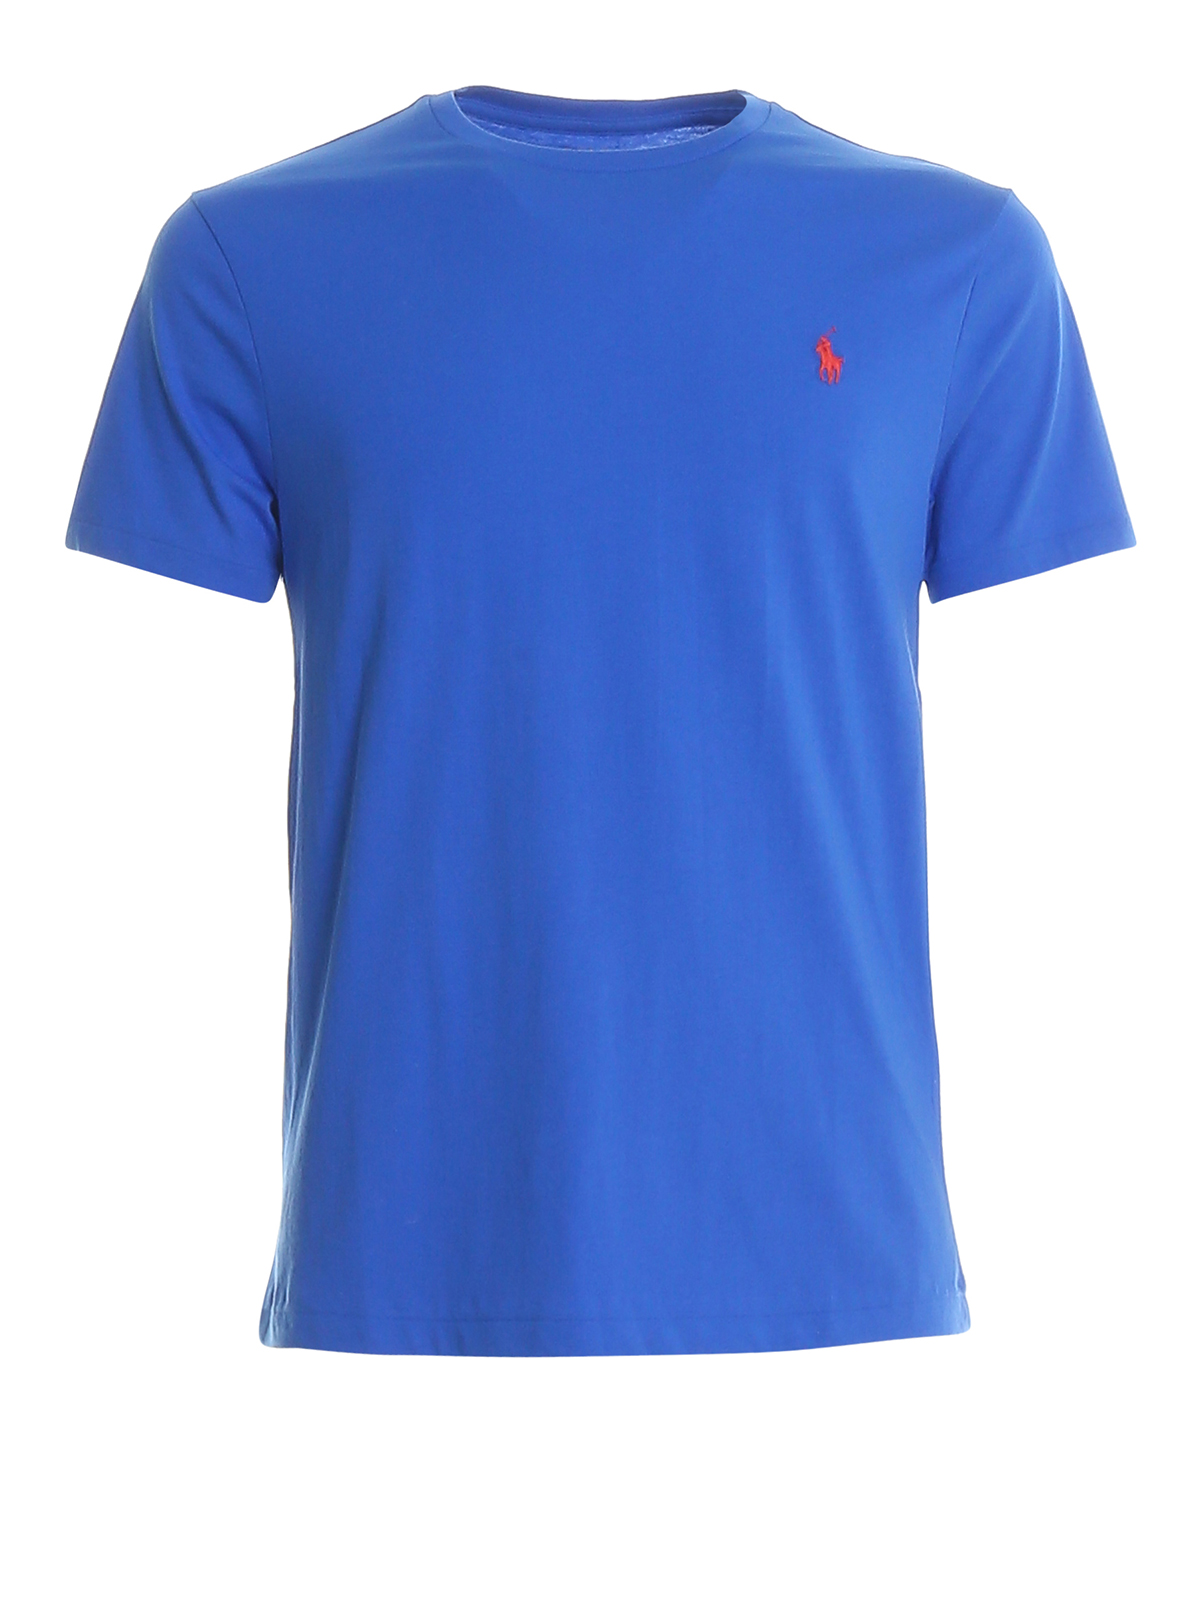 POLO RALPH LAUREN JERSEY T-SHIRT WITH EMBROIDERED LOGO